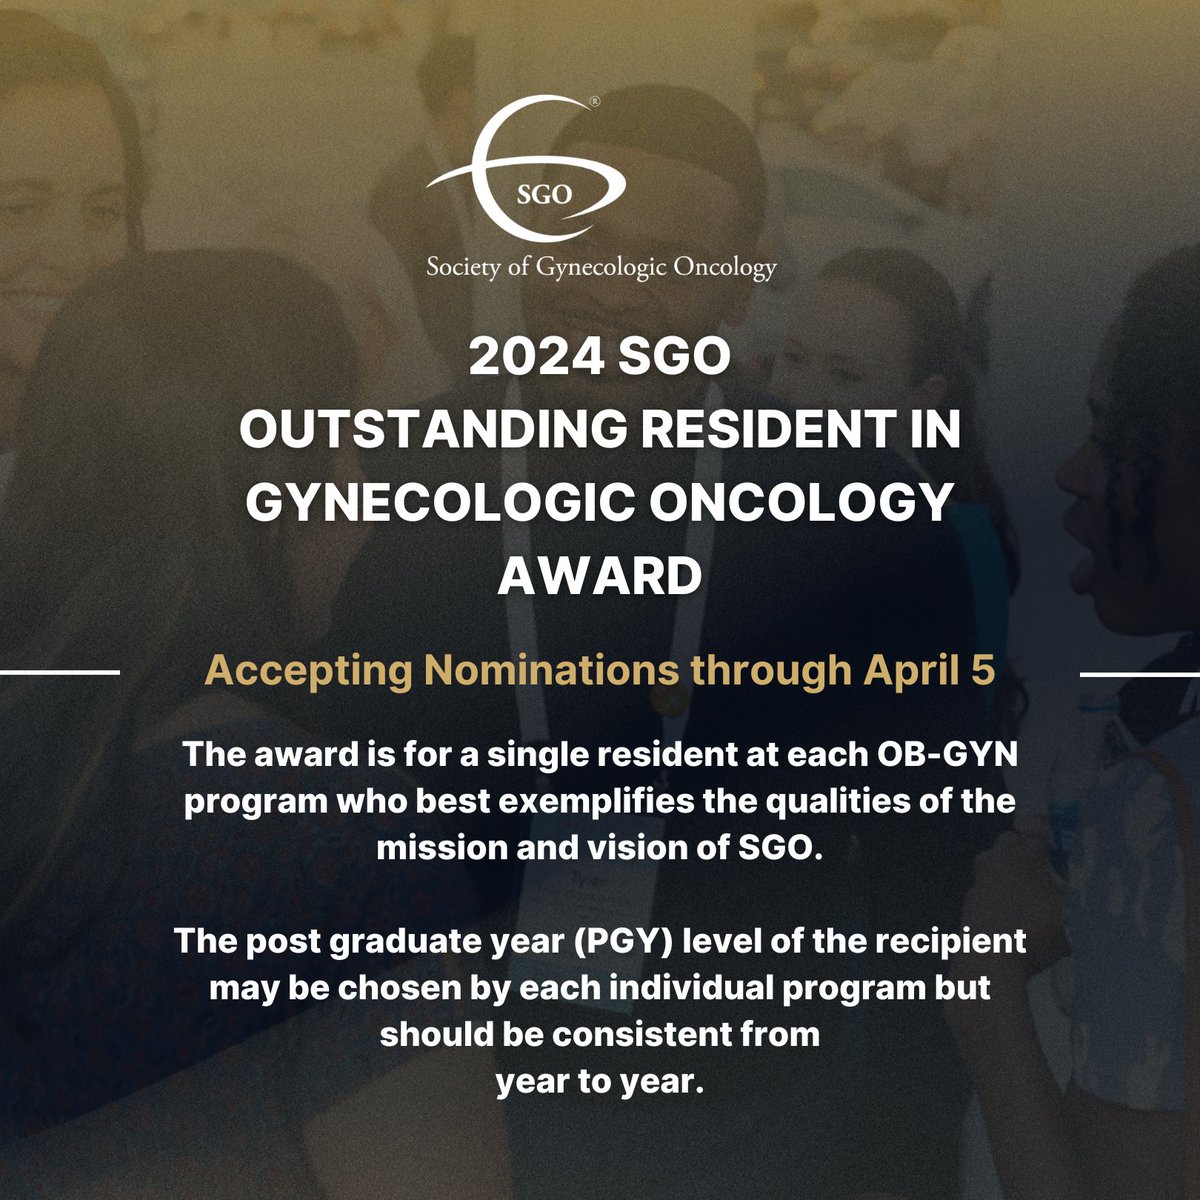 Do you know a resident who is best representing the mission and vision of SGO? Today is your last opportunity to nominate them for our 2024 SGO Outstanding Resident in Gynecologic Oncology Award! Please submit your nomination at the link below: surveymonkey.com/r/MYBGK66